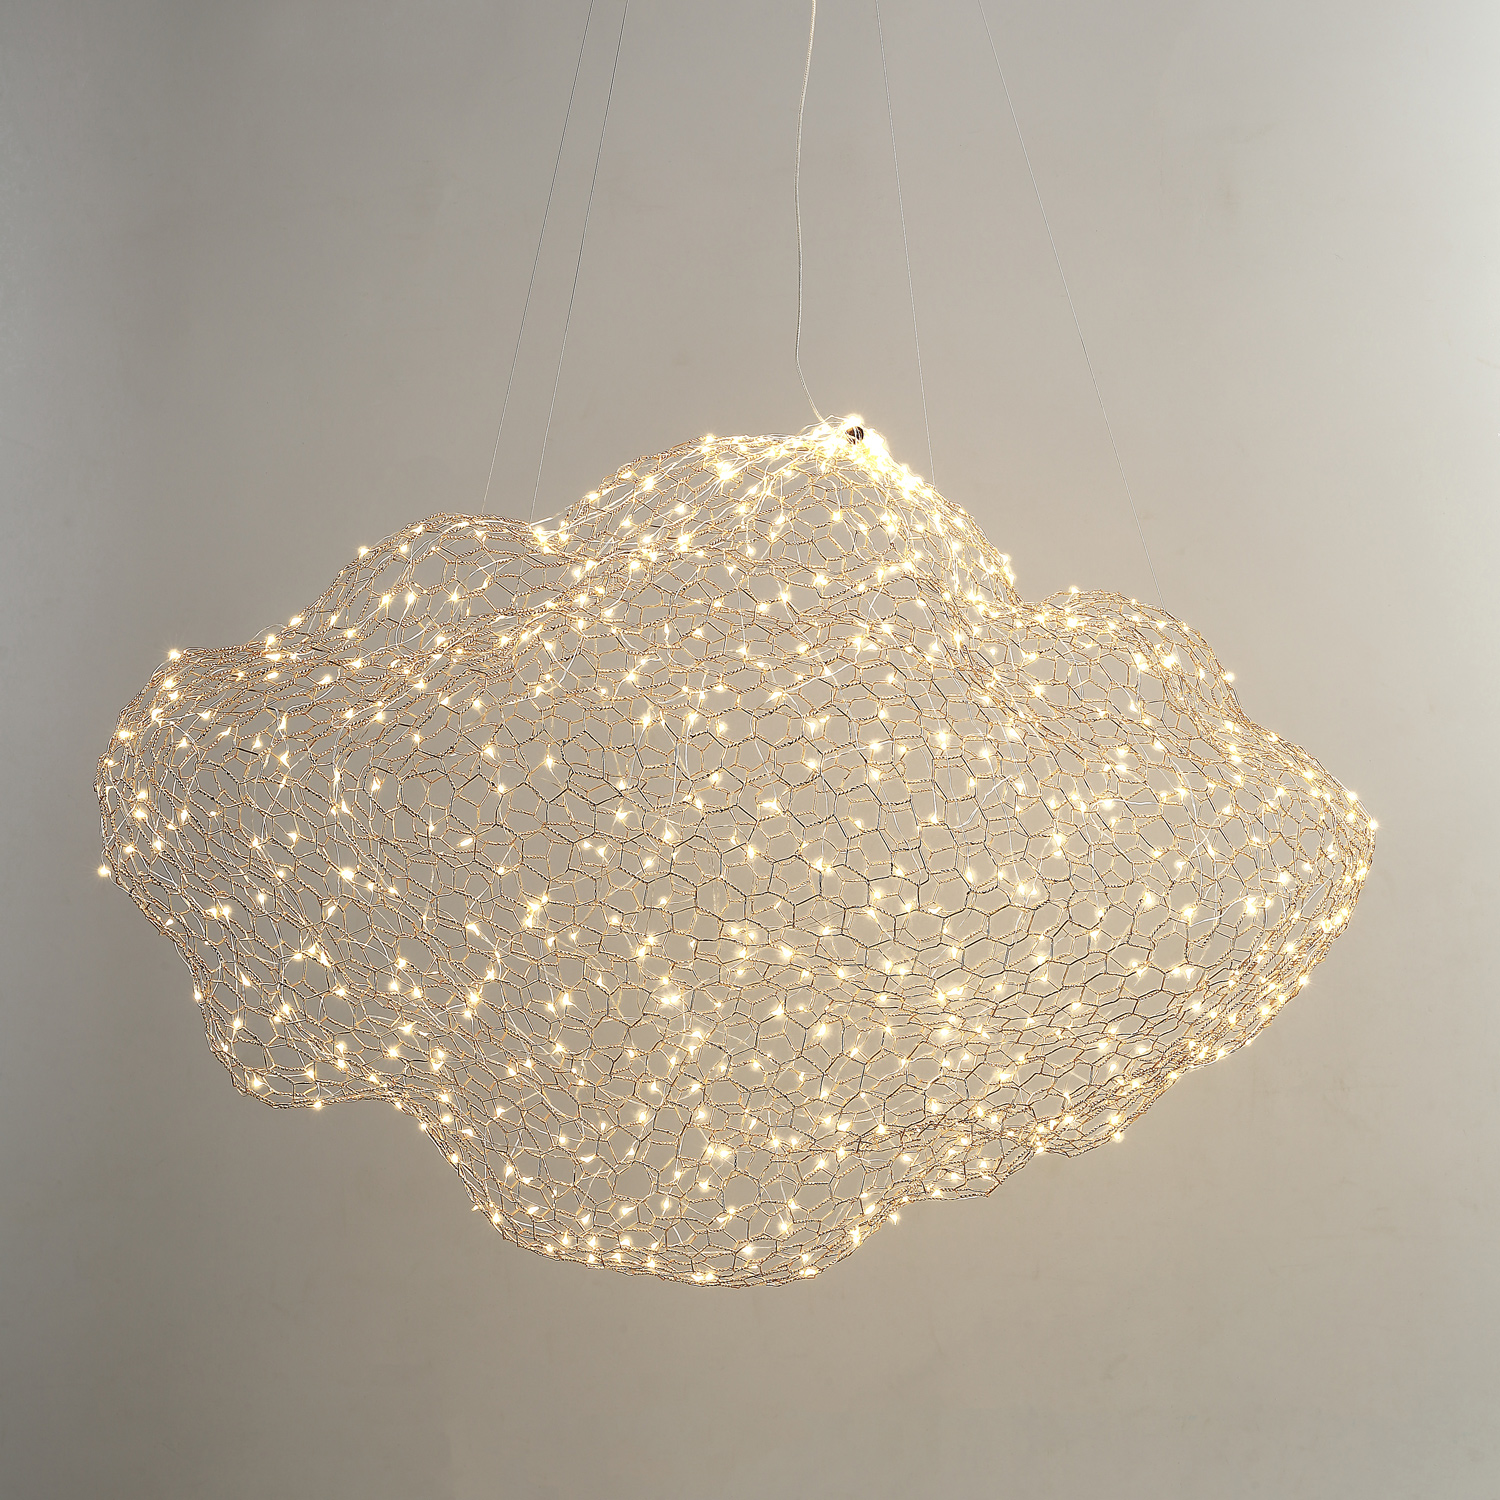 Little Known Ways to Cloud Light Led